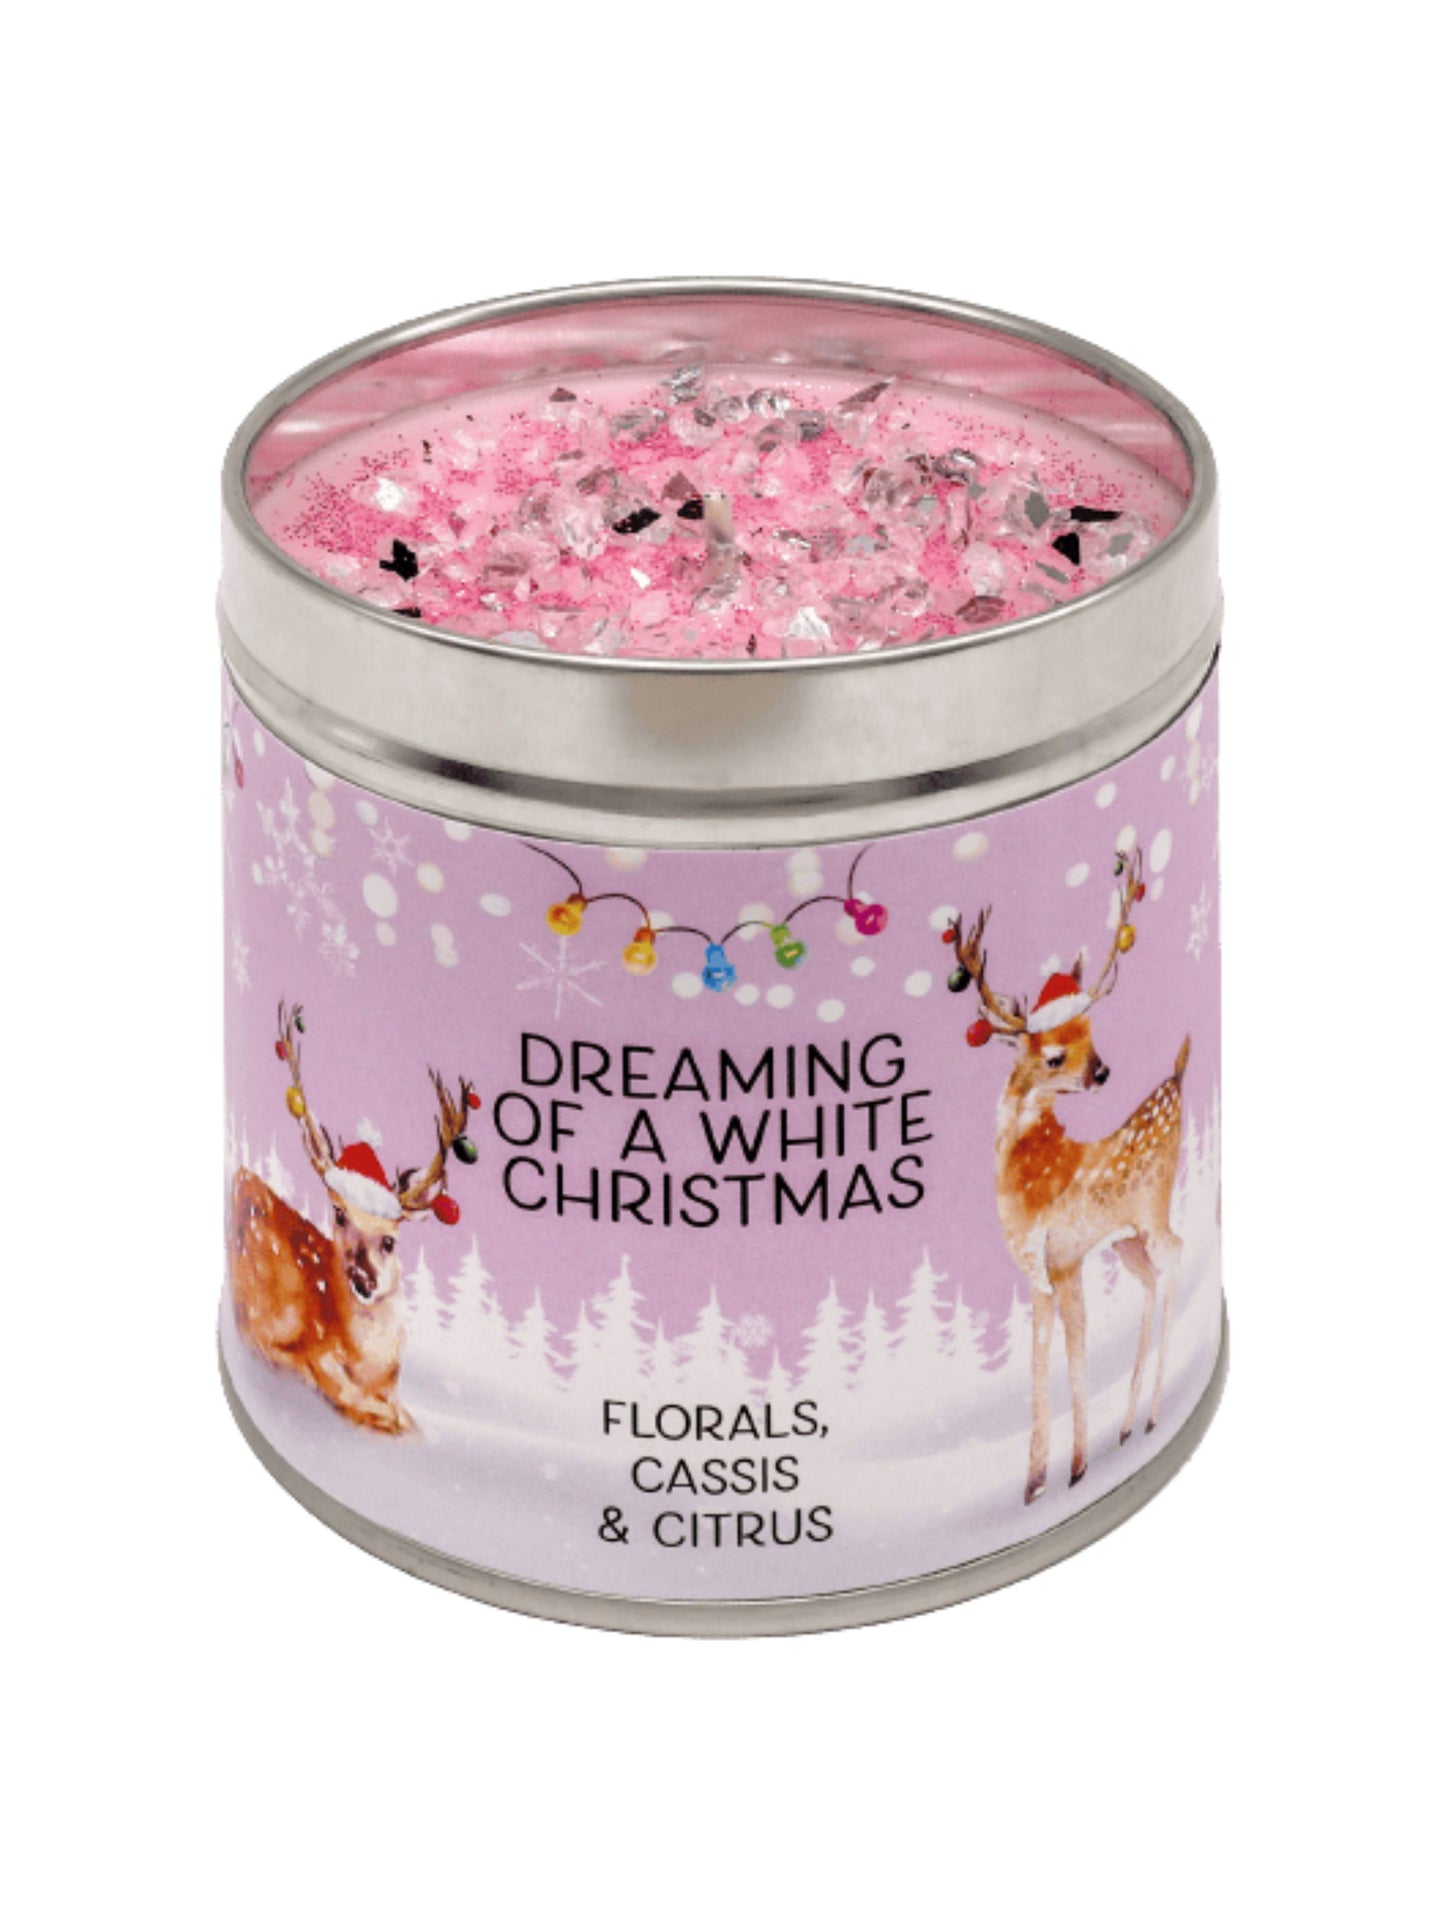 Spirit of Christmas Collection - Dreaming of a White Christmas